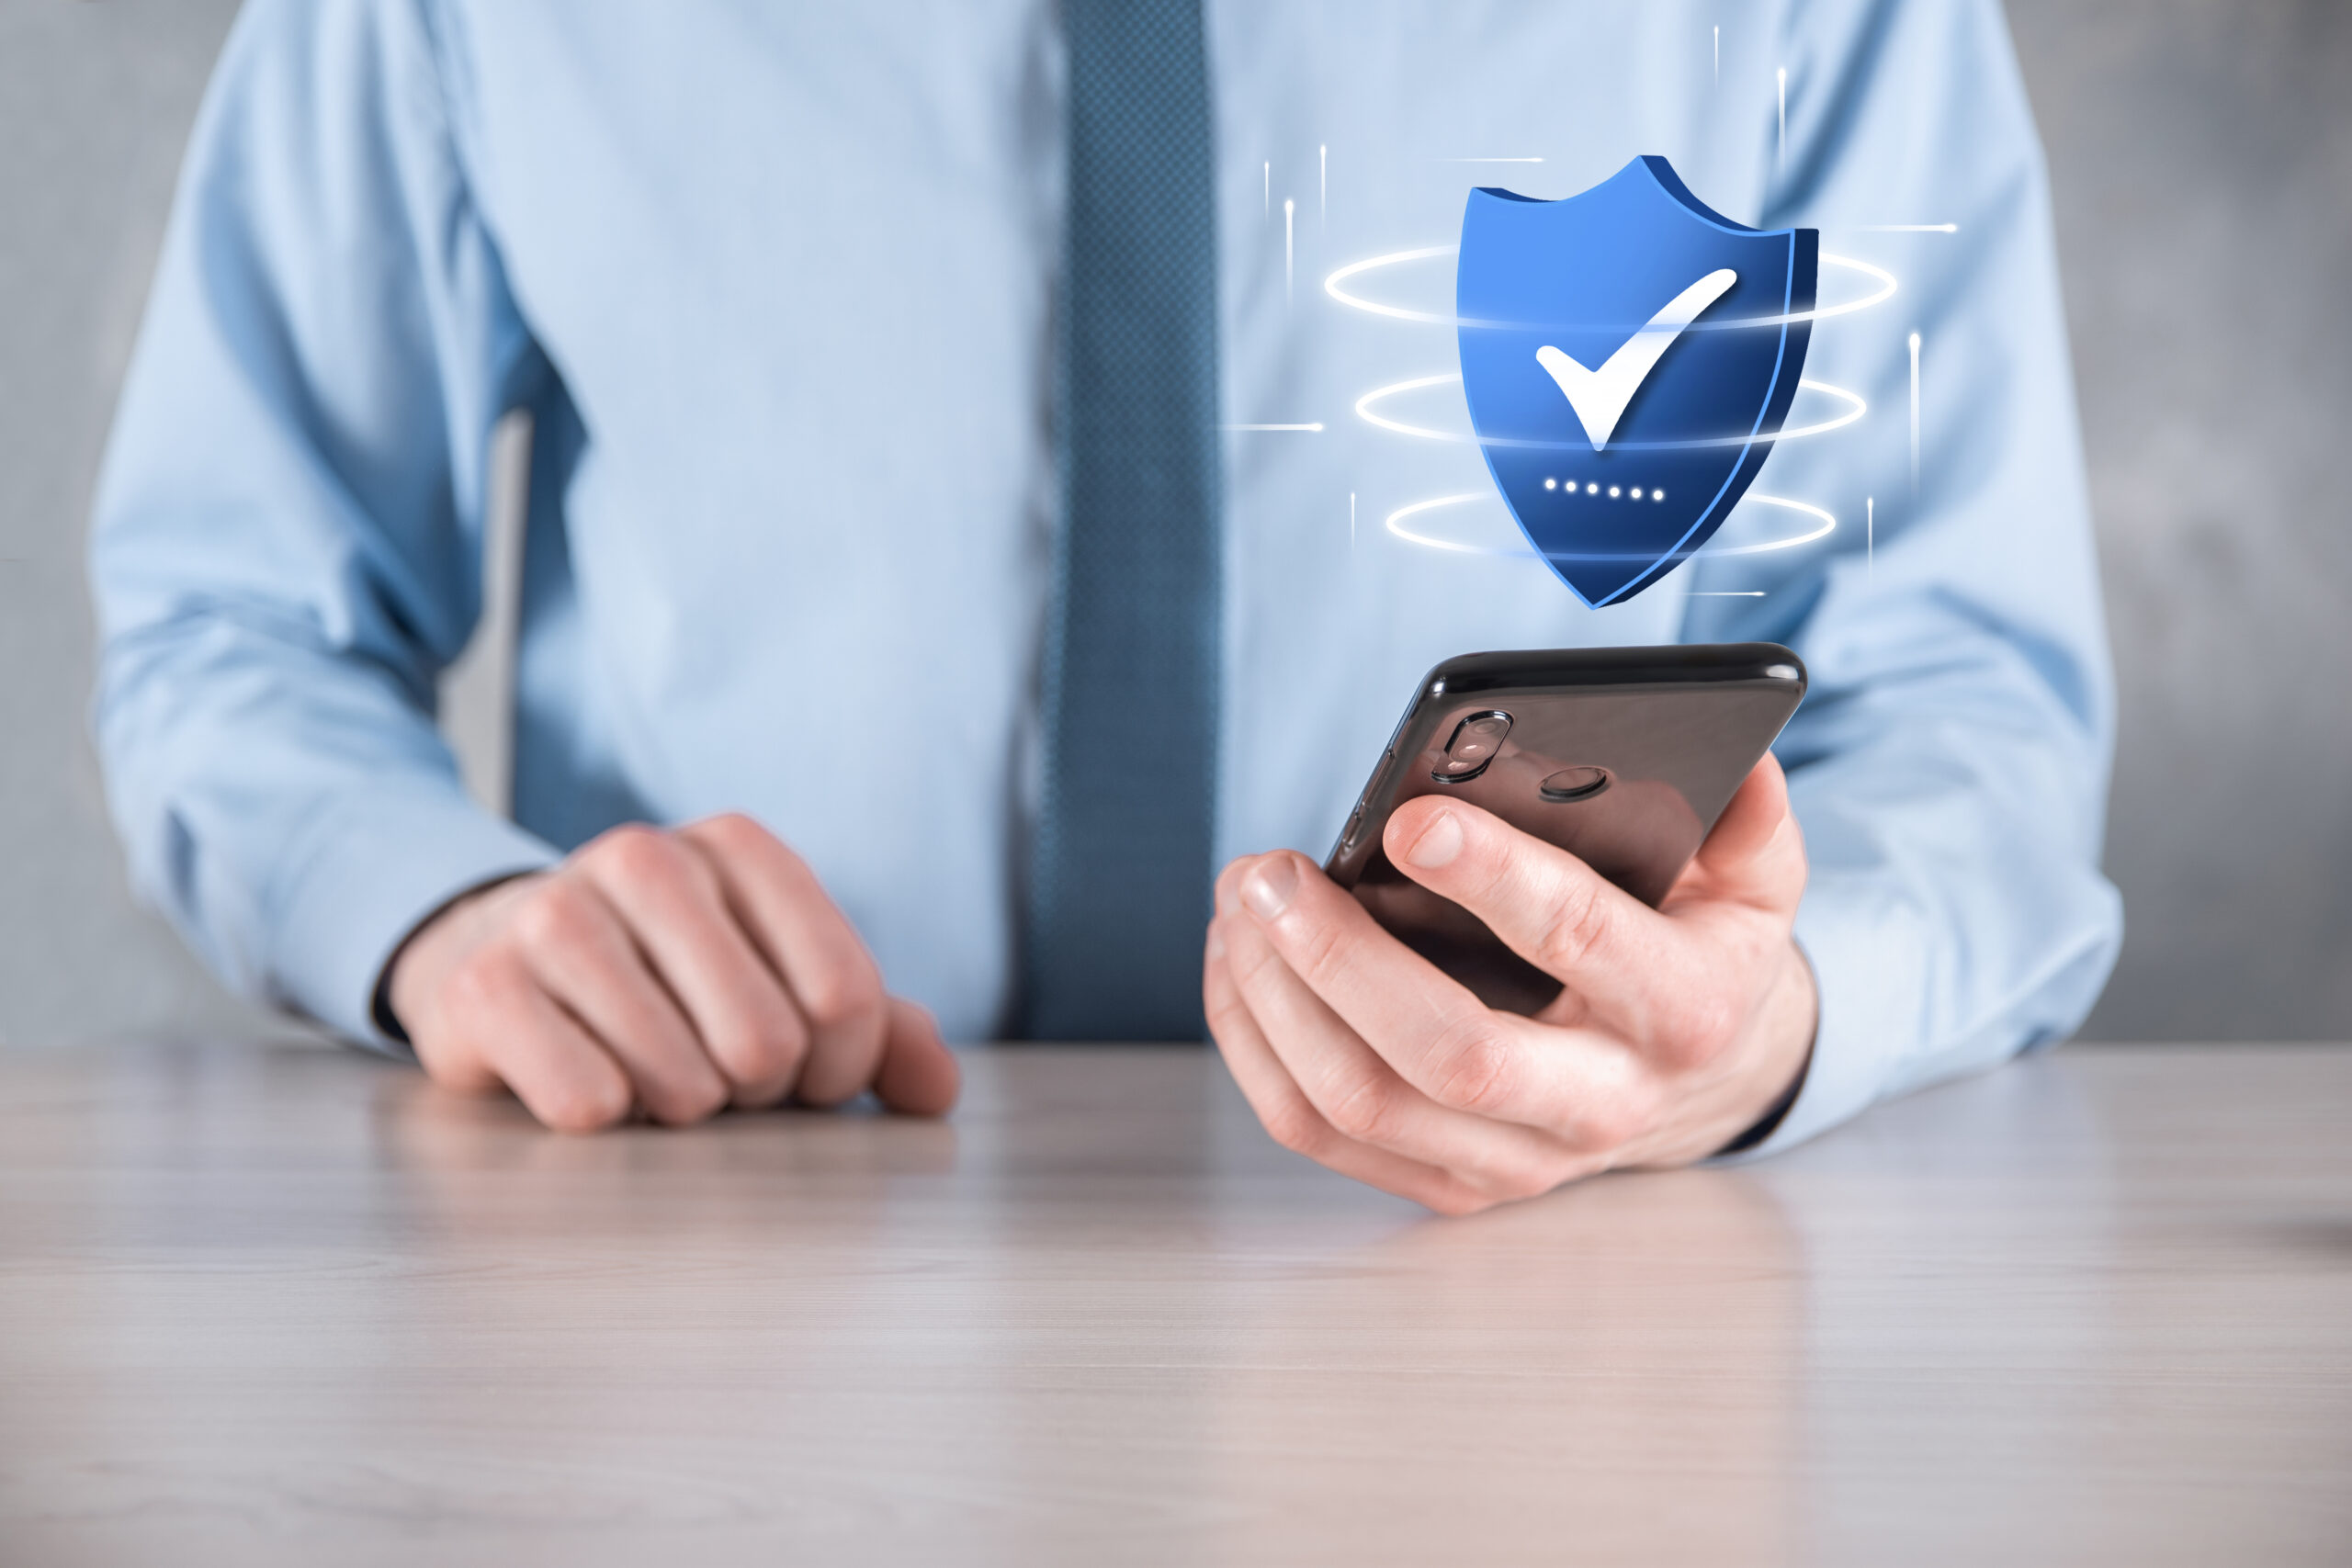 Mobile verification Vs. customer authentication - which is best?